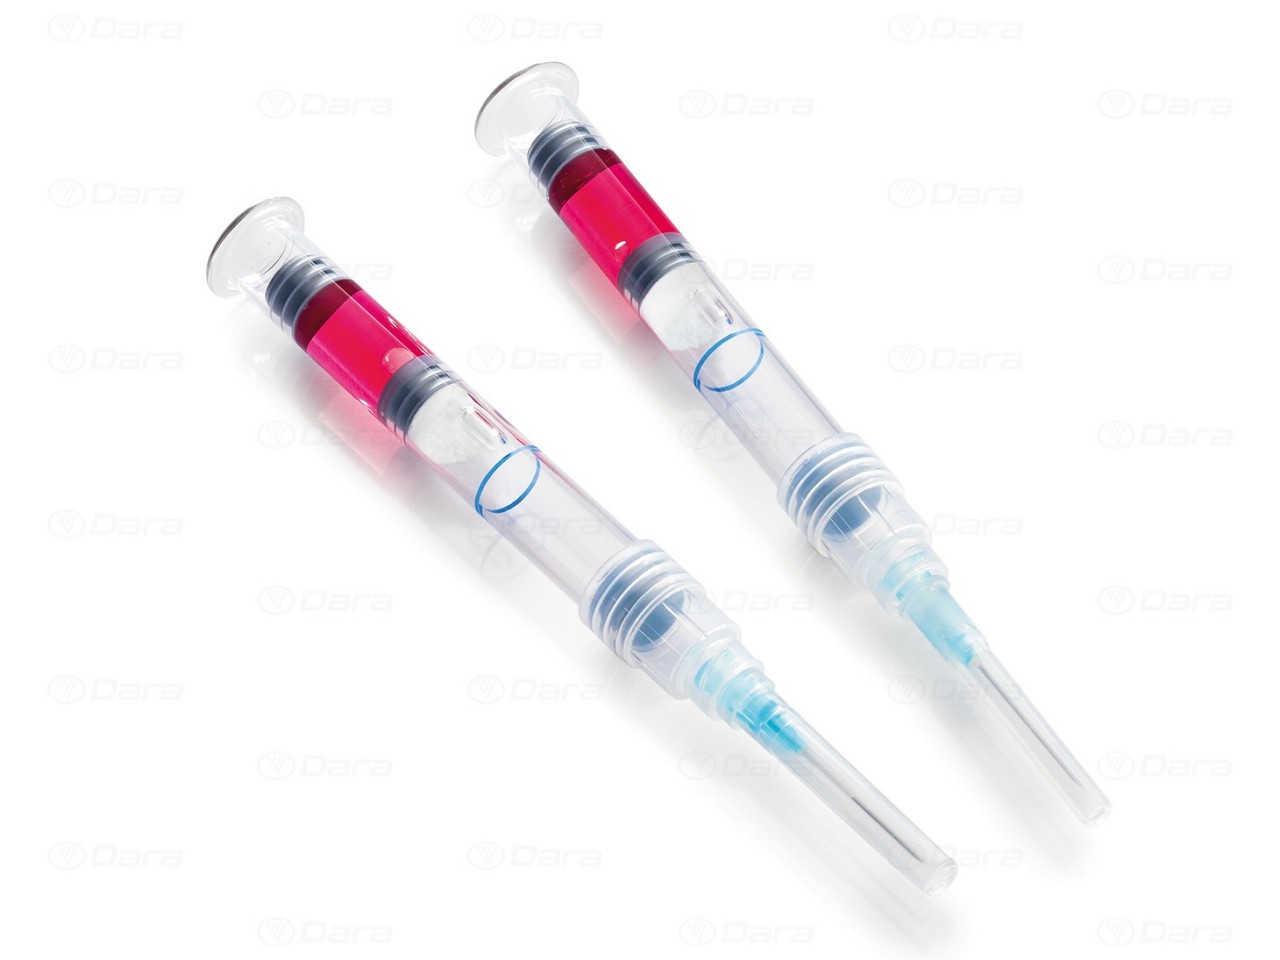 double chamber syringes